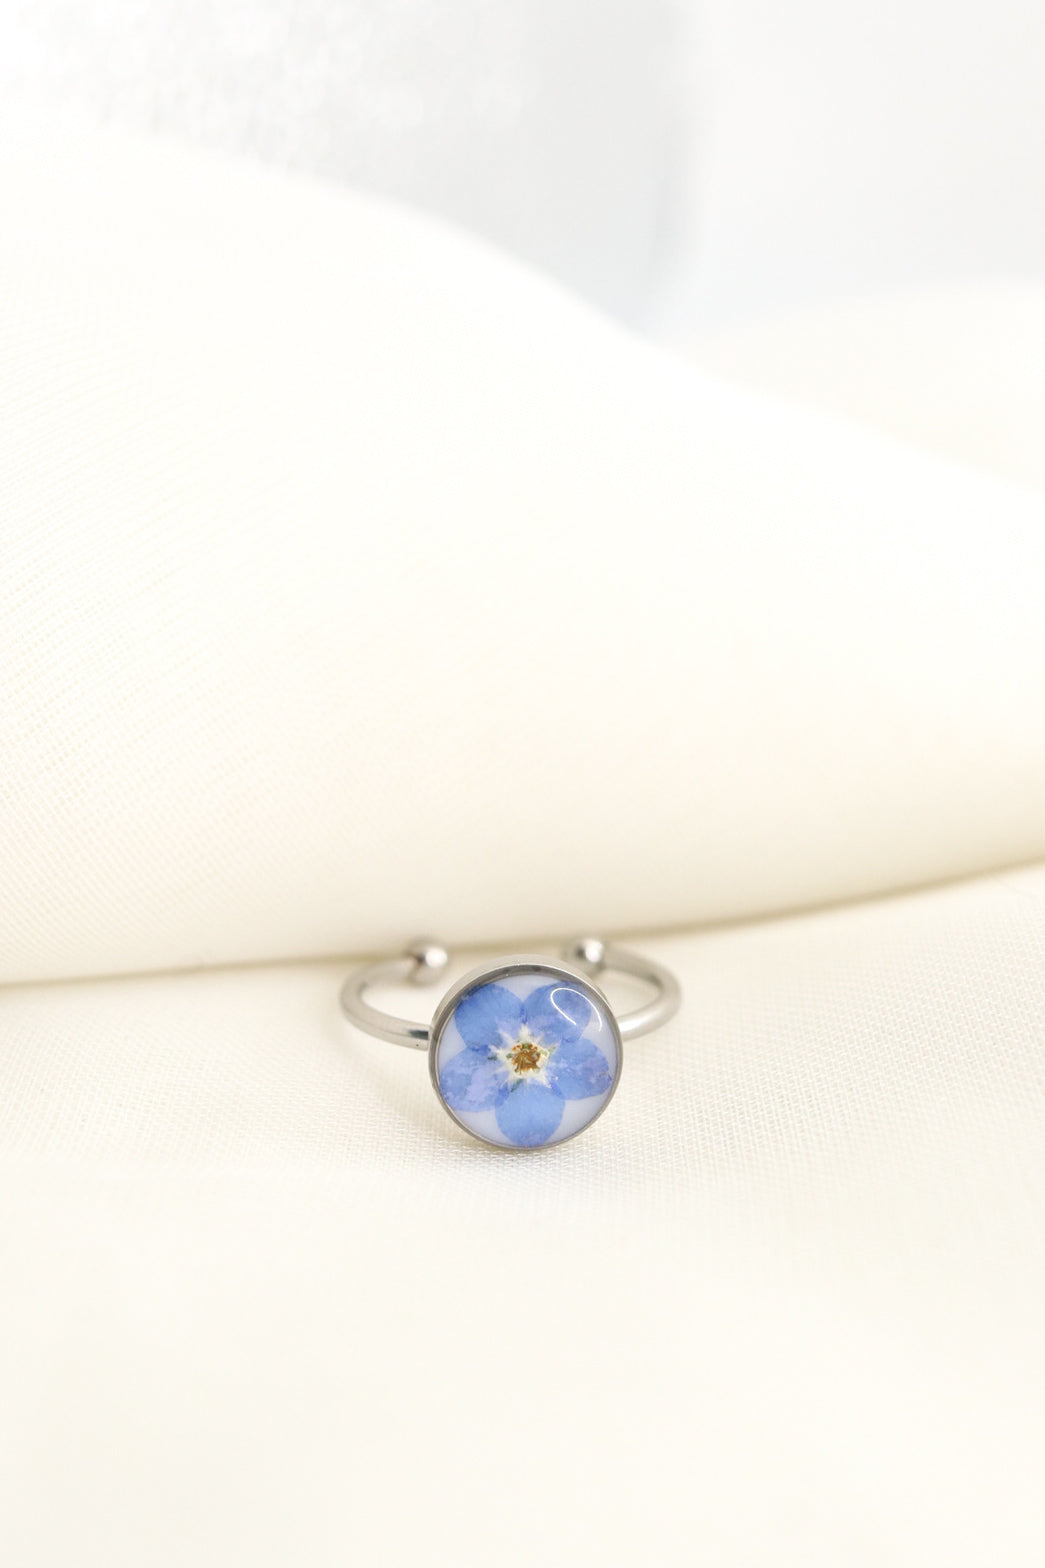 Forget Me Not Wildflower Resin Ring, Adjustable Blue Pressed Flower Silver Ring, Blue Blossom Botanical Ring Christmas Gift For Her Copy   Draft